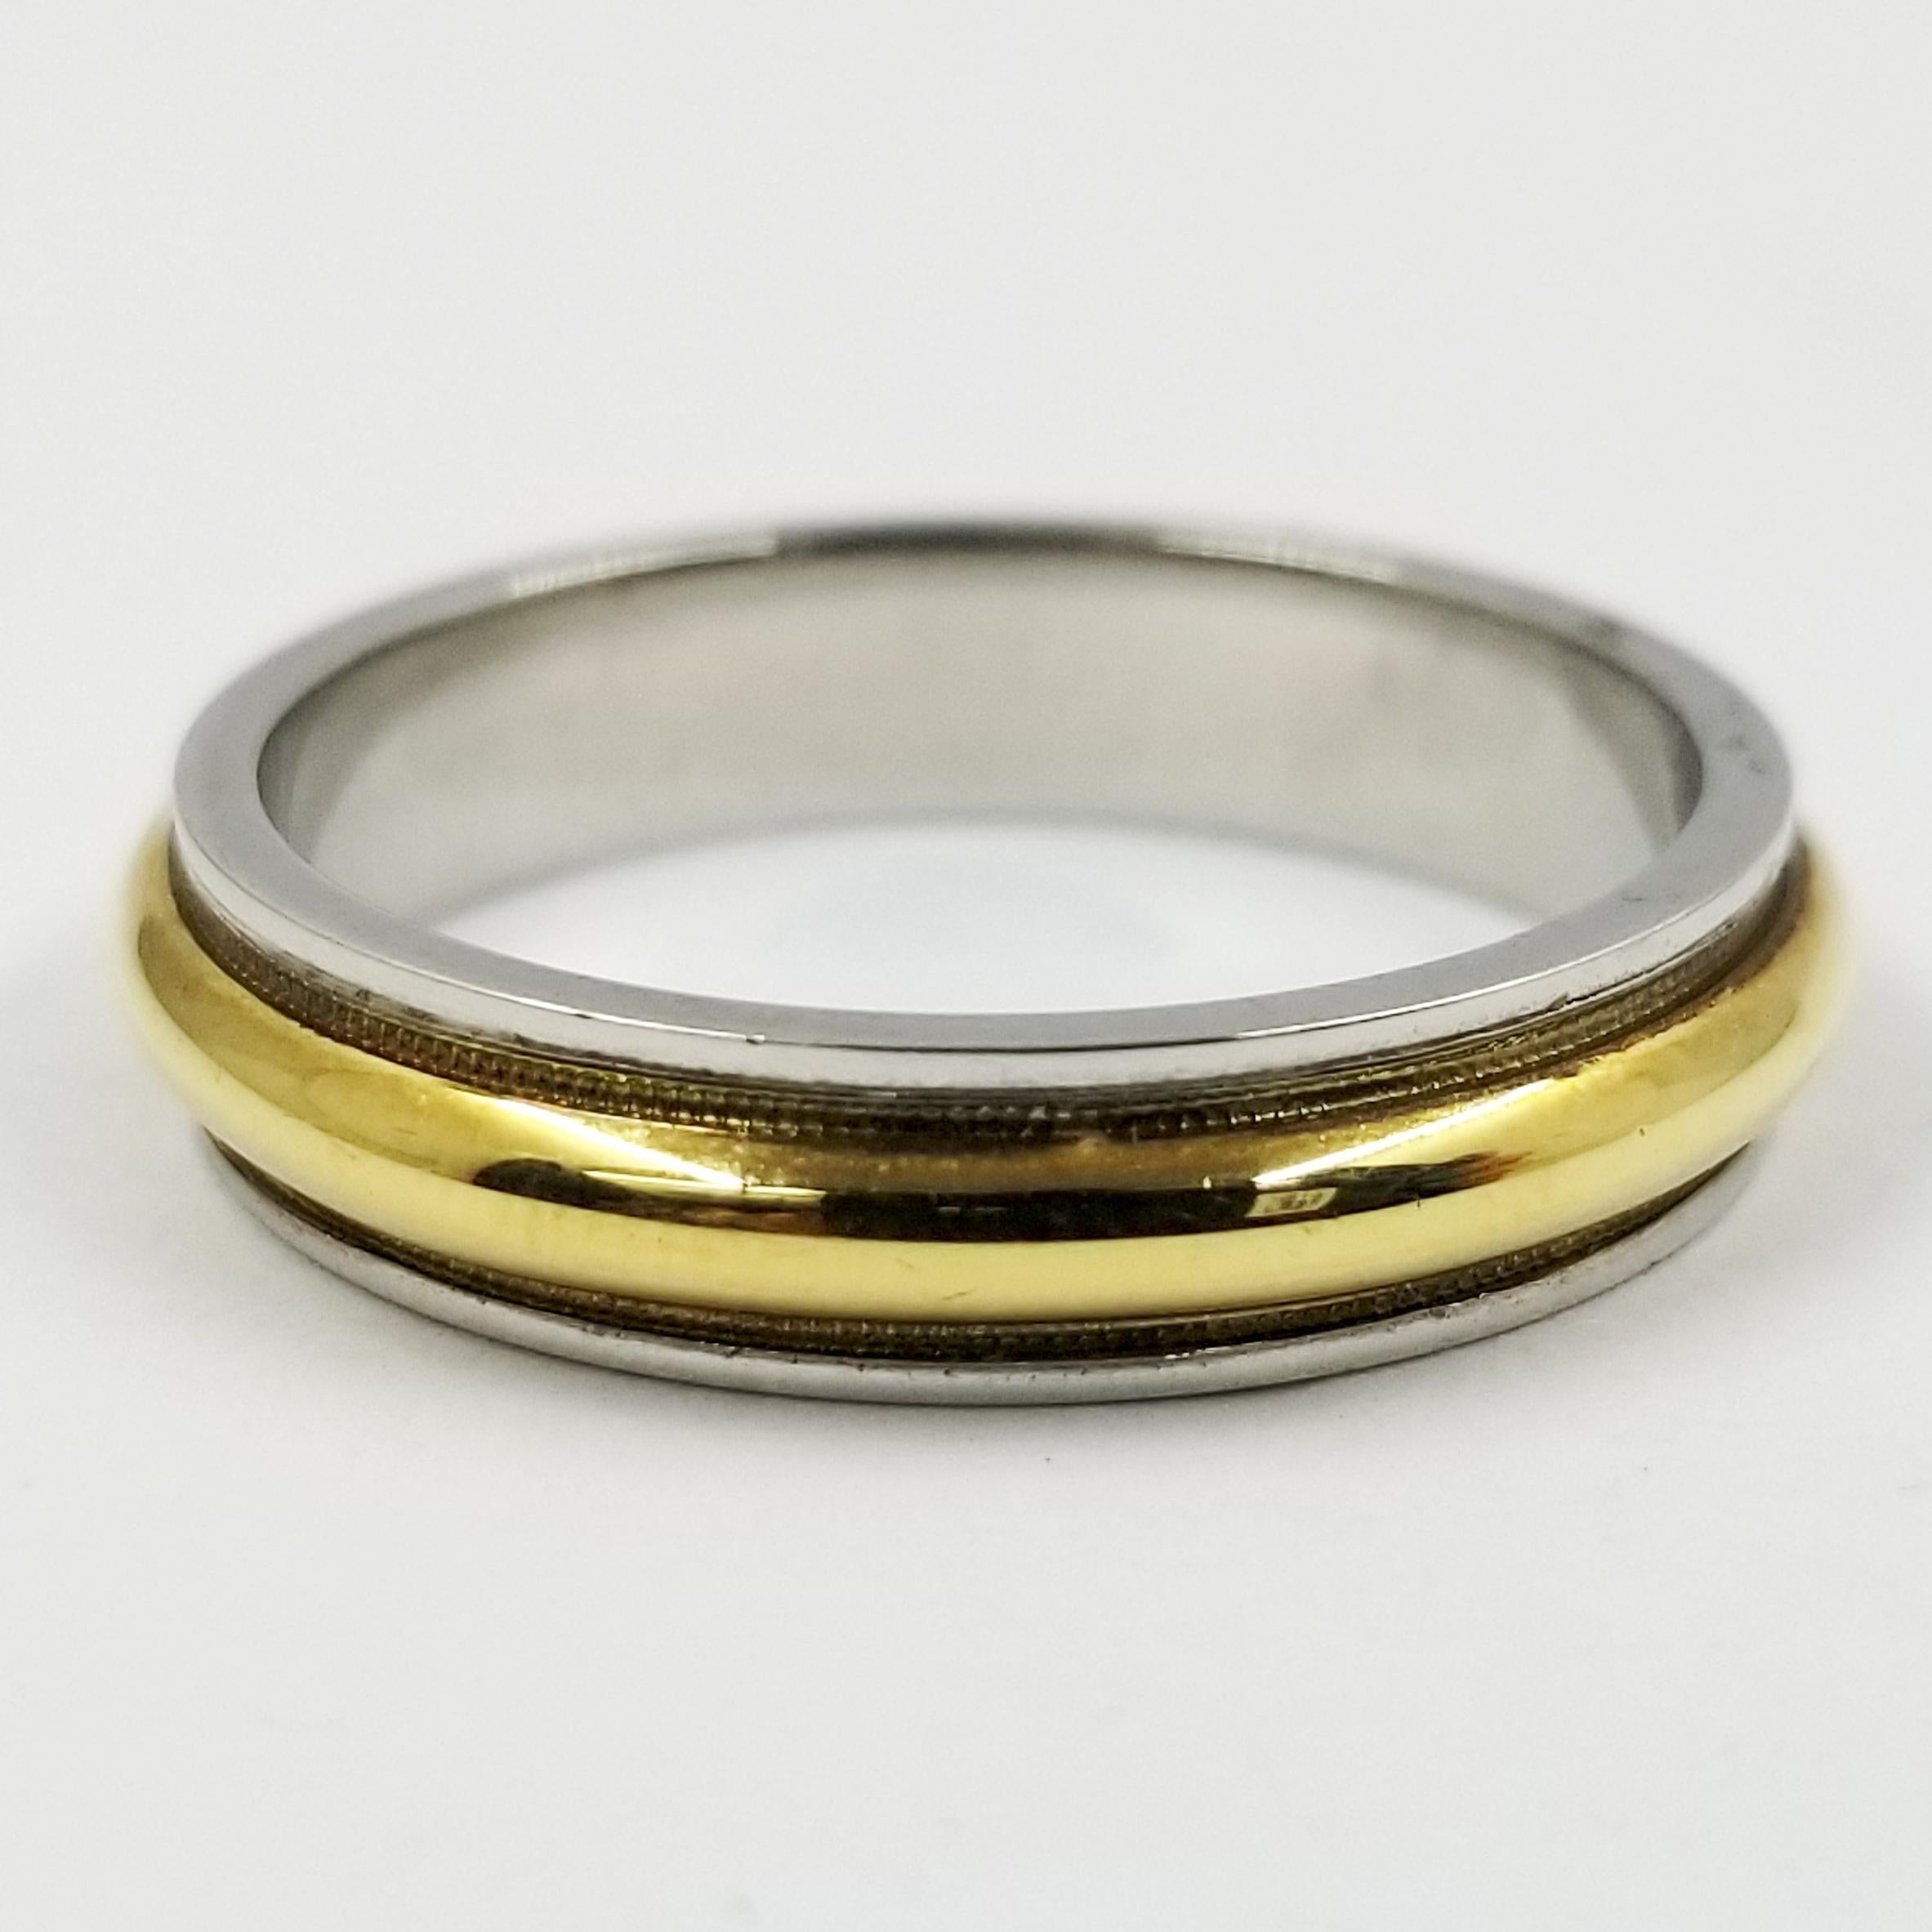 Platinum & 18 Karat Yellow Gold High Polish Wedding Band. 5mm Wide With Domed Center With Milgrain Edge. Finger Size 10